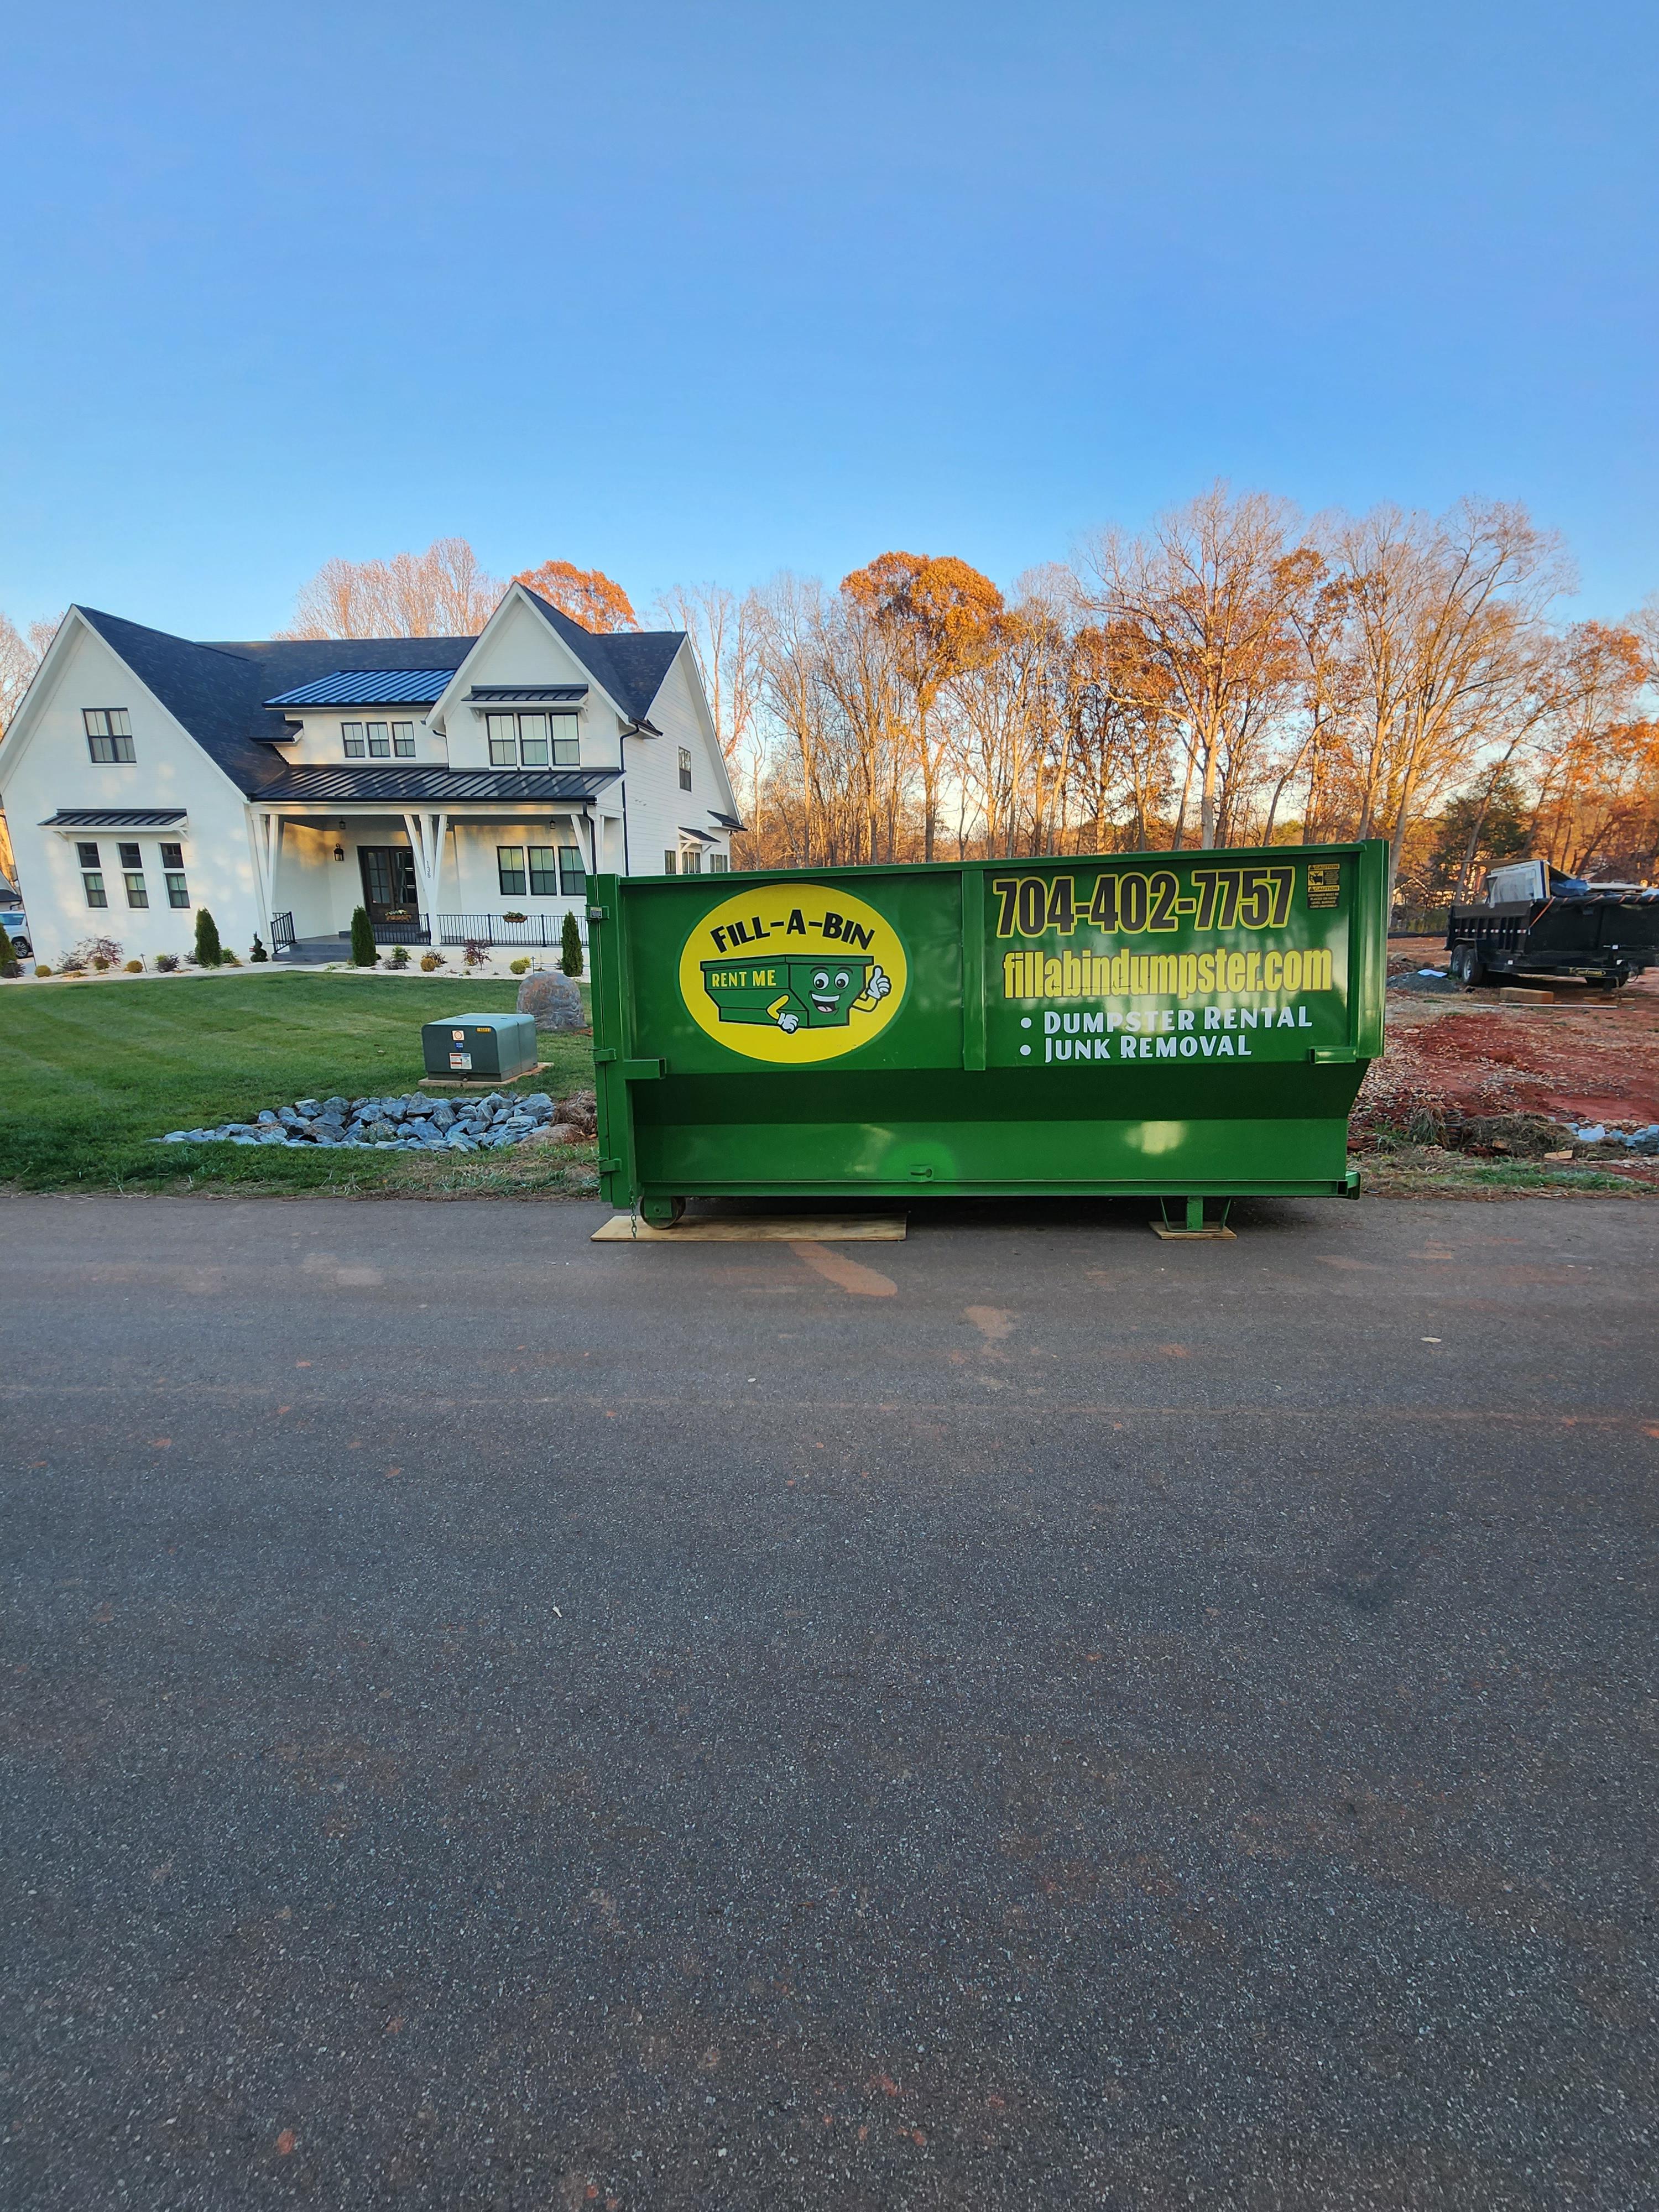 When it comes to dumpster rental services in Statesville, NC, we stand out as the premier choice. Our extensive selection of dumpster sizes and flexible rental options makes us the ideal partner for any project, whether you're tackling a home renovation, construction job, or just a major cleanup. We take pride in our commitment to exceptional customer service, ensuring that your dumpster rental experience is smooth and hassle-free from start to finish. With competitive pricing and a deep understanding of the local community's needs, we're your trusted source for convenient, reliable, and cost-effective dumpster rentals in Statesville, NC. Choose us, and let us help you make your waste disposal needs as easy as can be.